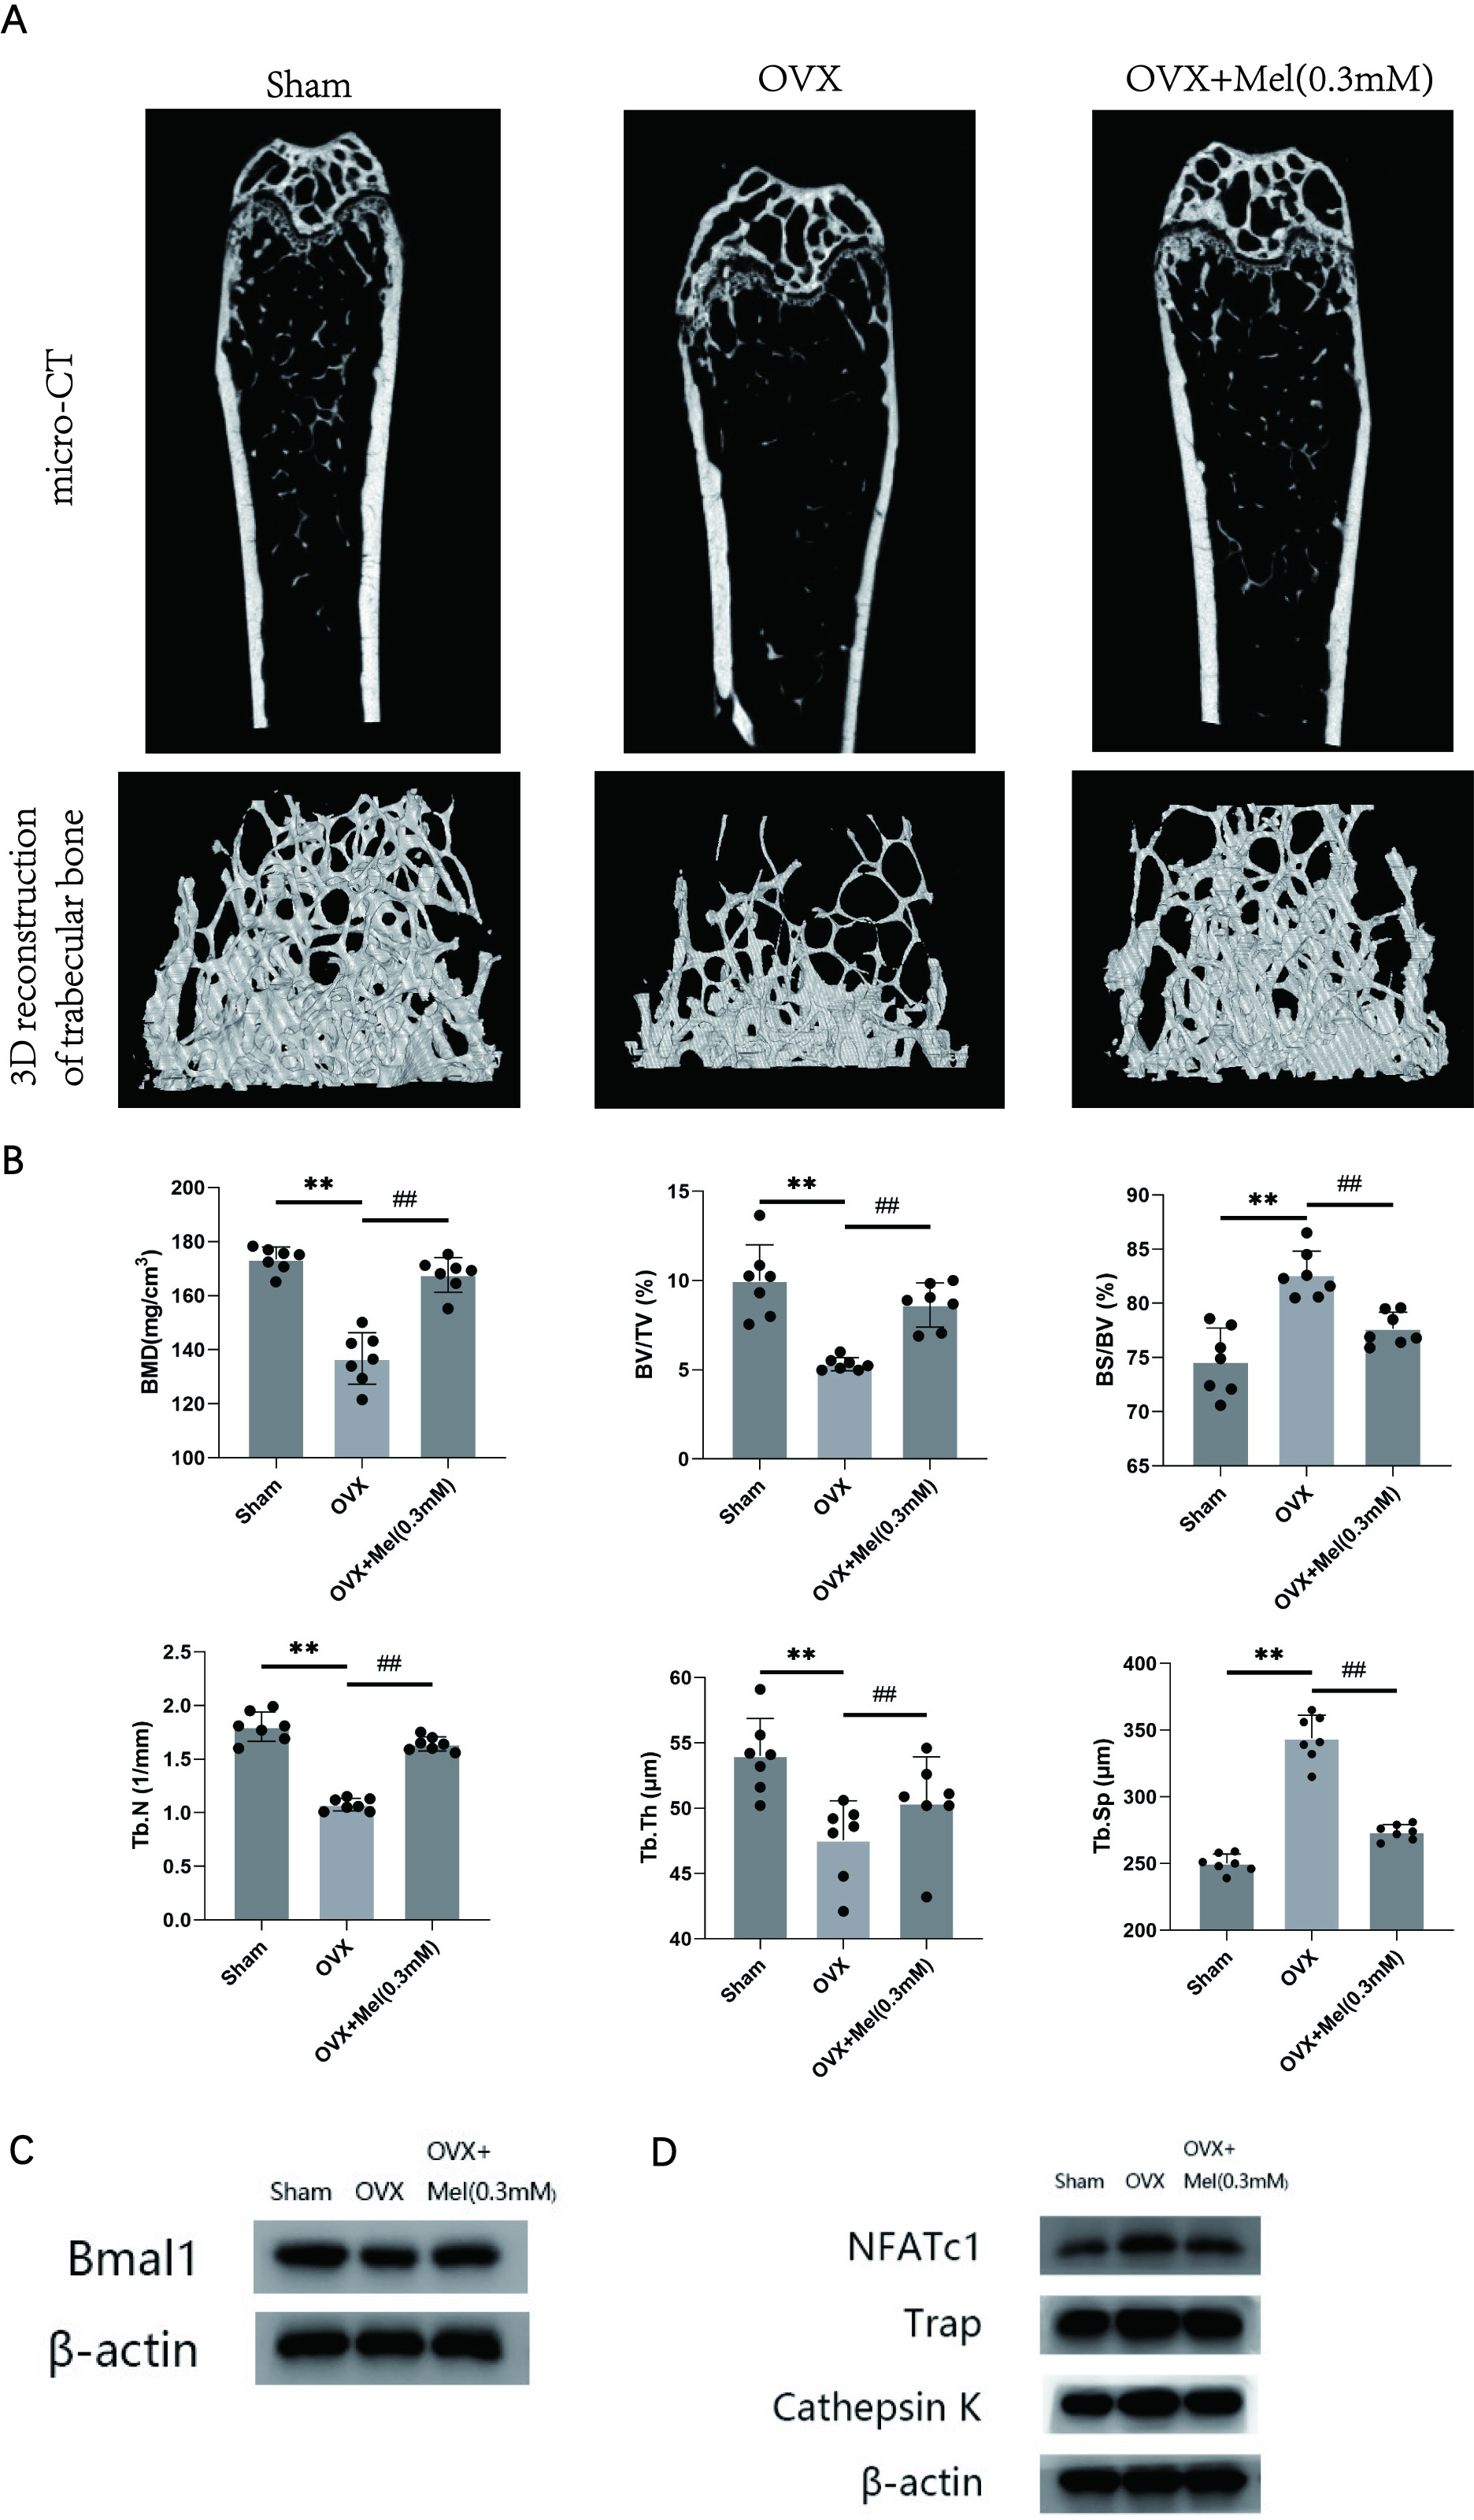 Fig. 5 
            Melatonin (Mel) improves bone loss in ovariectomized (OVX) mice. a) 2D and 3D reconstruction of the femur micro-CT images. b) Related parameters obtained from image analysis. c) Protein levels of the BMAL1 gene and β-actin in femur samples. d) Protein levels of the osteoclast markers in femur samples. Data are means and standard deviations, *p < 0.05, **p < 0.01 compared with sham and #p < 0.05, ##p < 0.01 compared with OVX, analyzed using one-way analysis of variance.
          